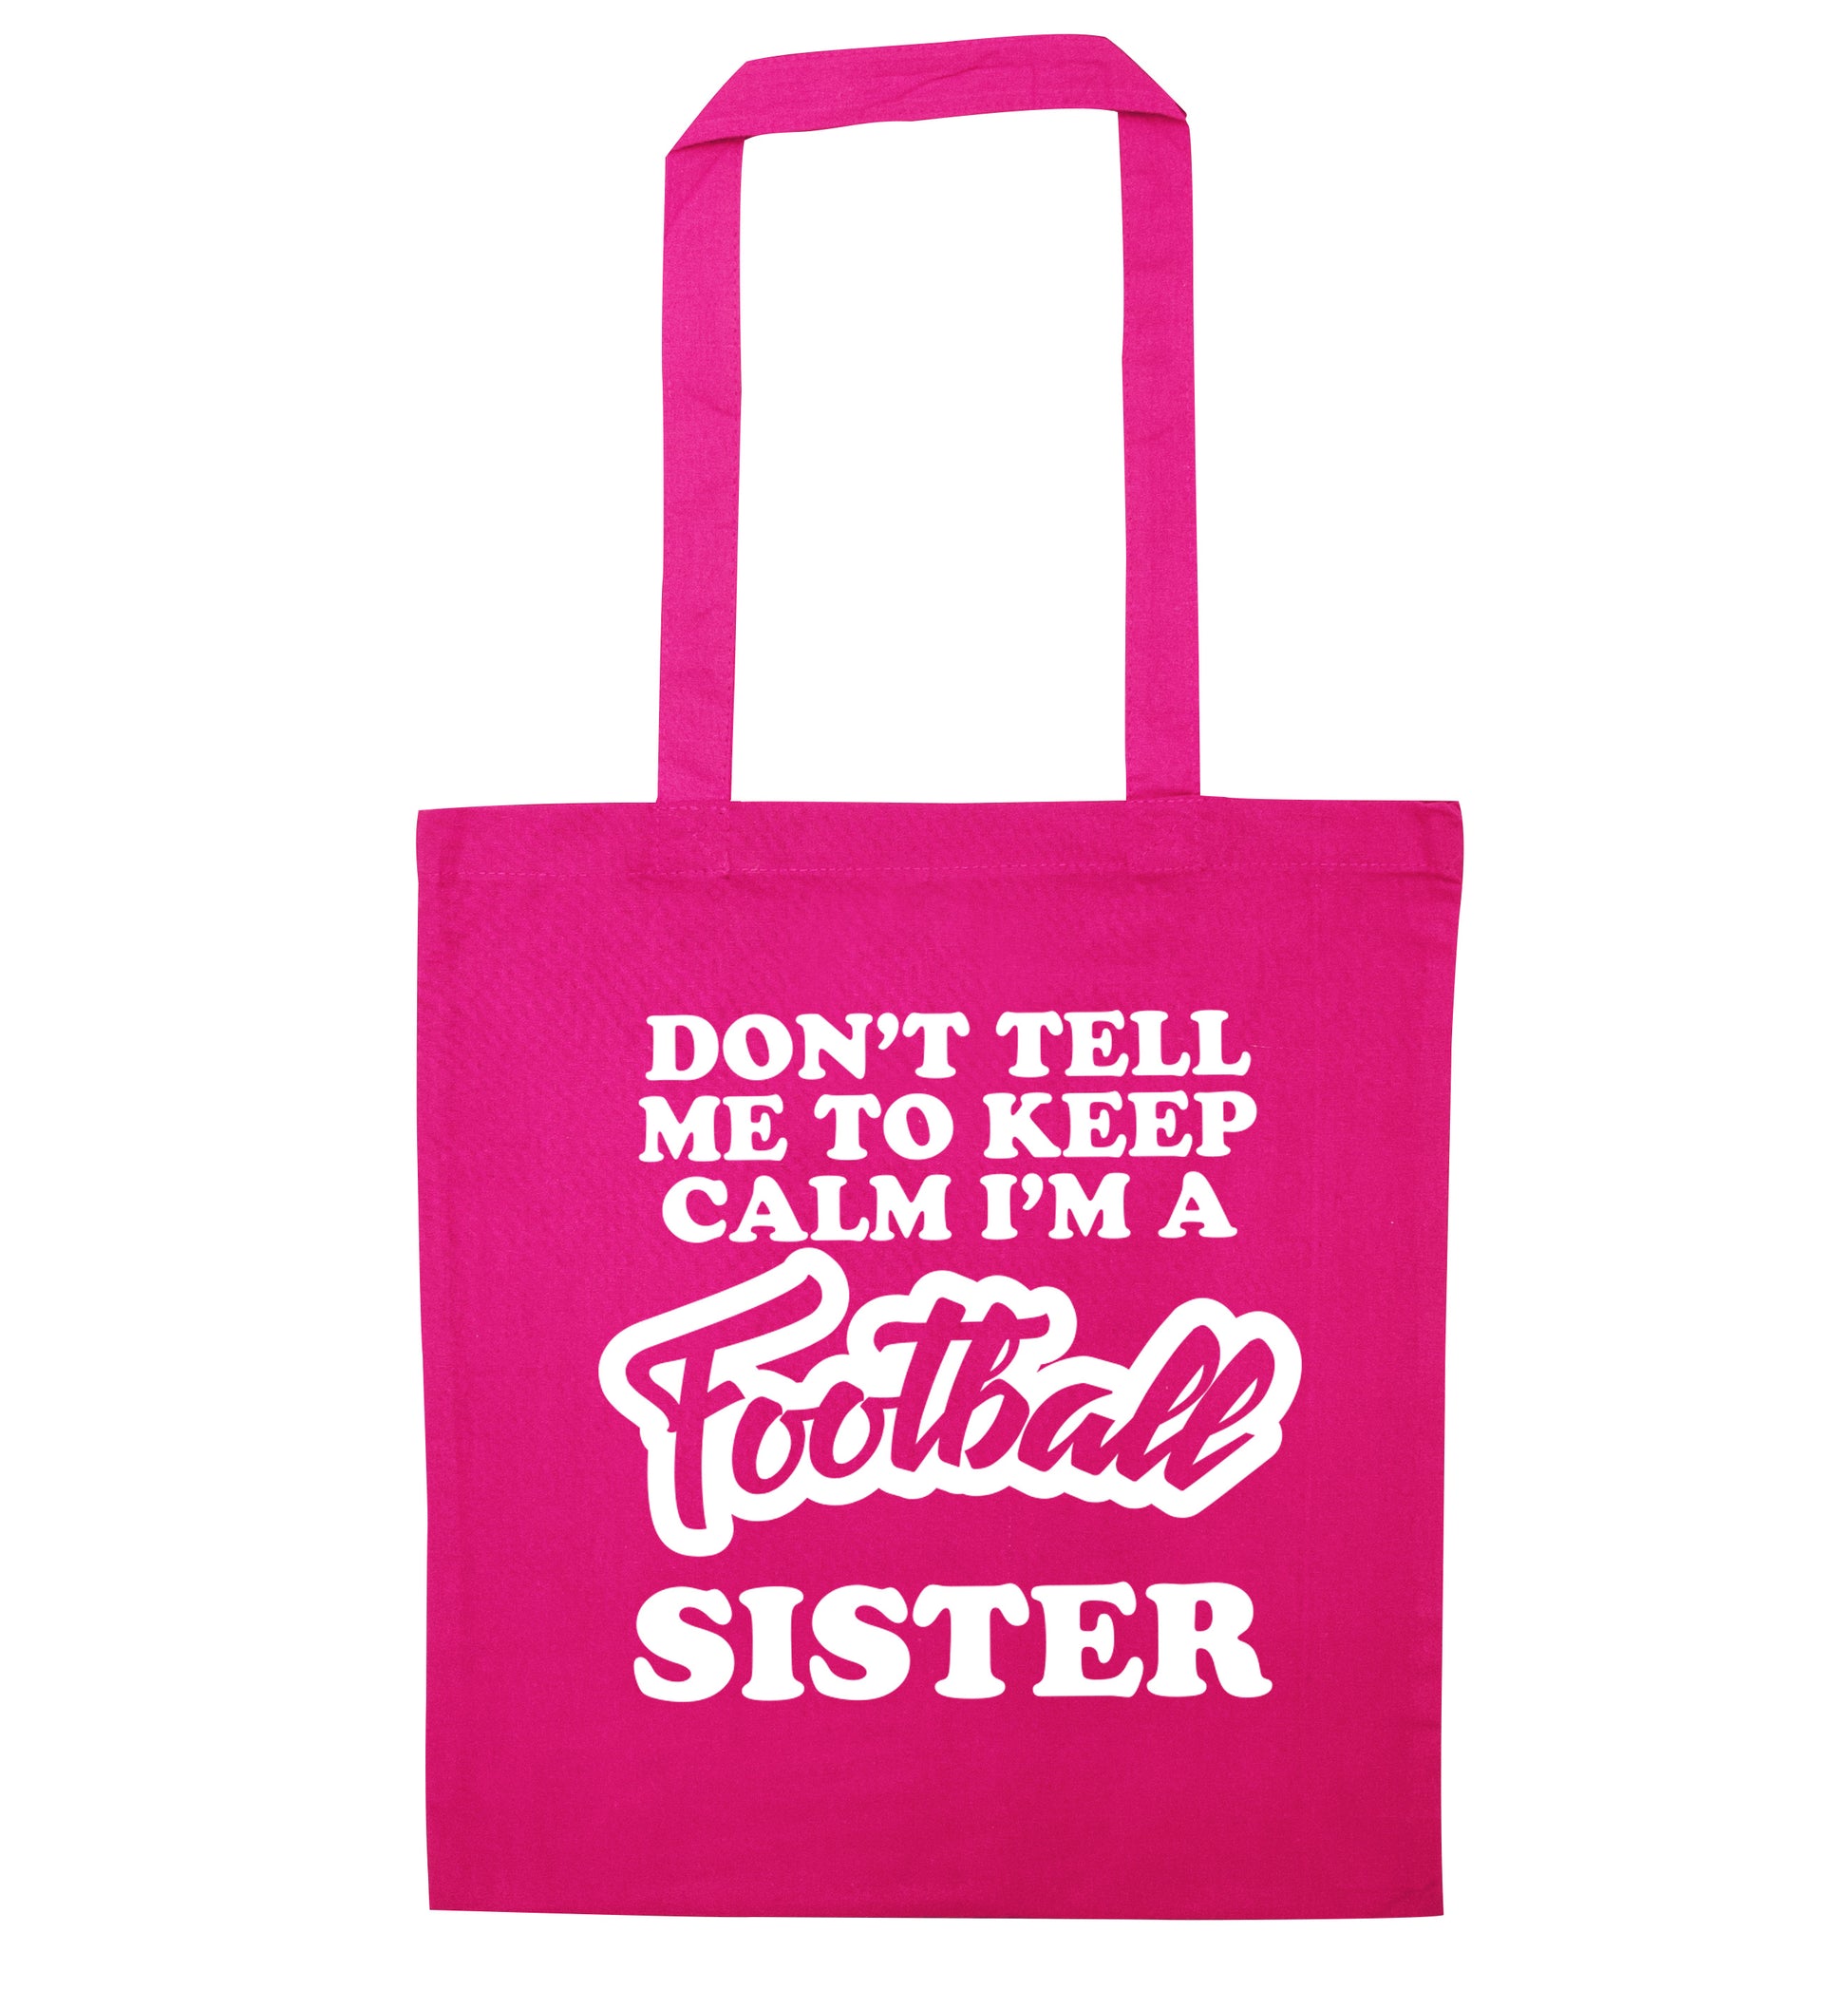 Don't tell me to keep calm I'm a football sister pink tote bag